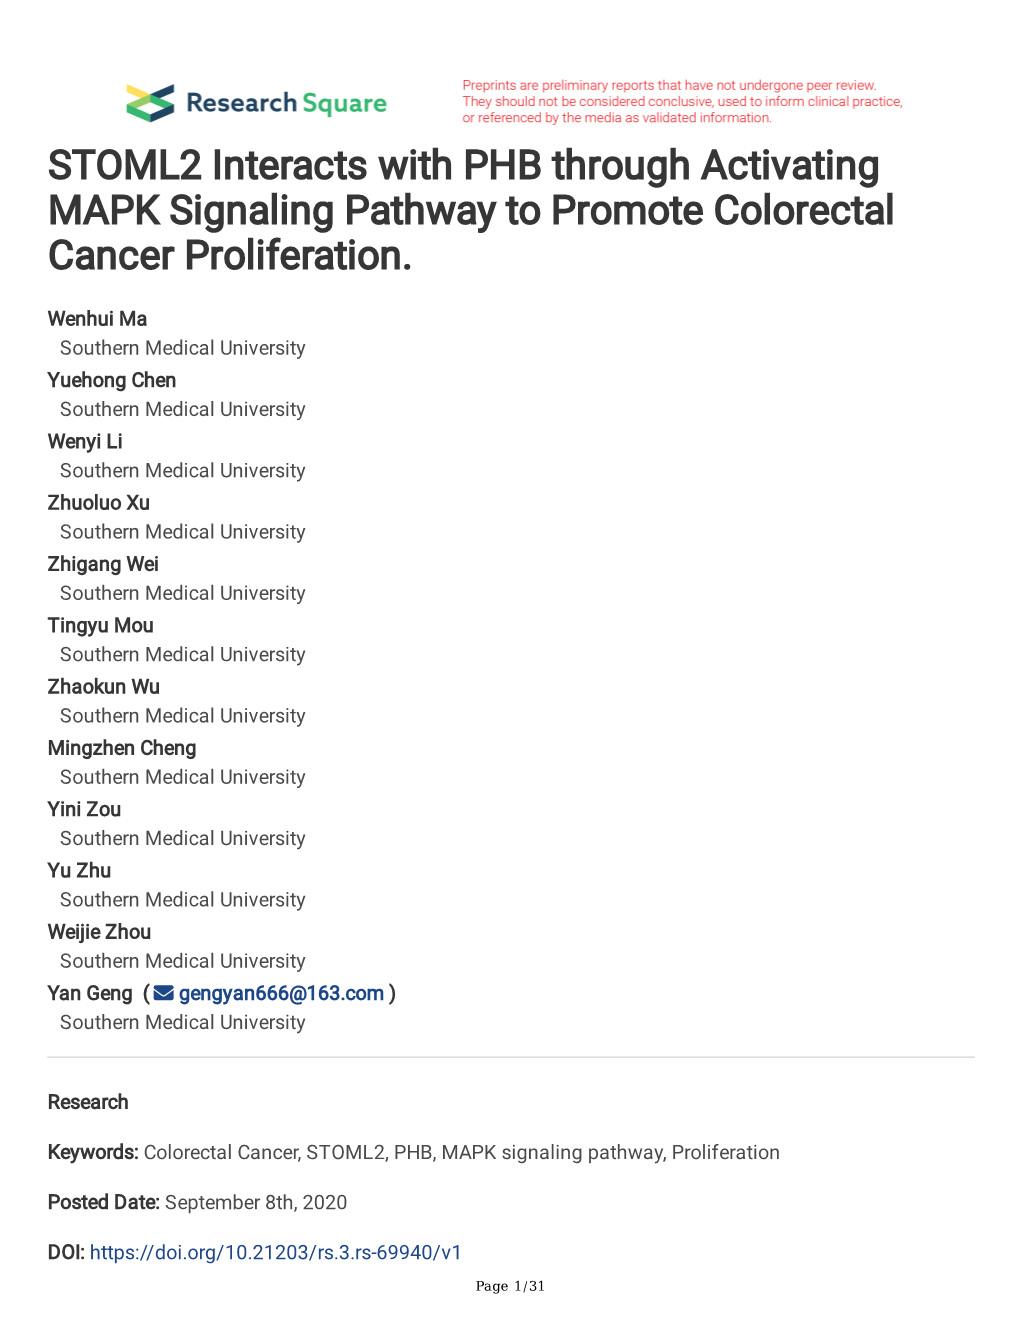 STOML2 Interacts with PHB Through Activating MAPK Signaling Pathway to Promote Colorectal Cancer Proliferation